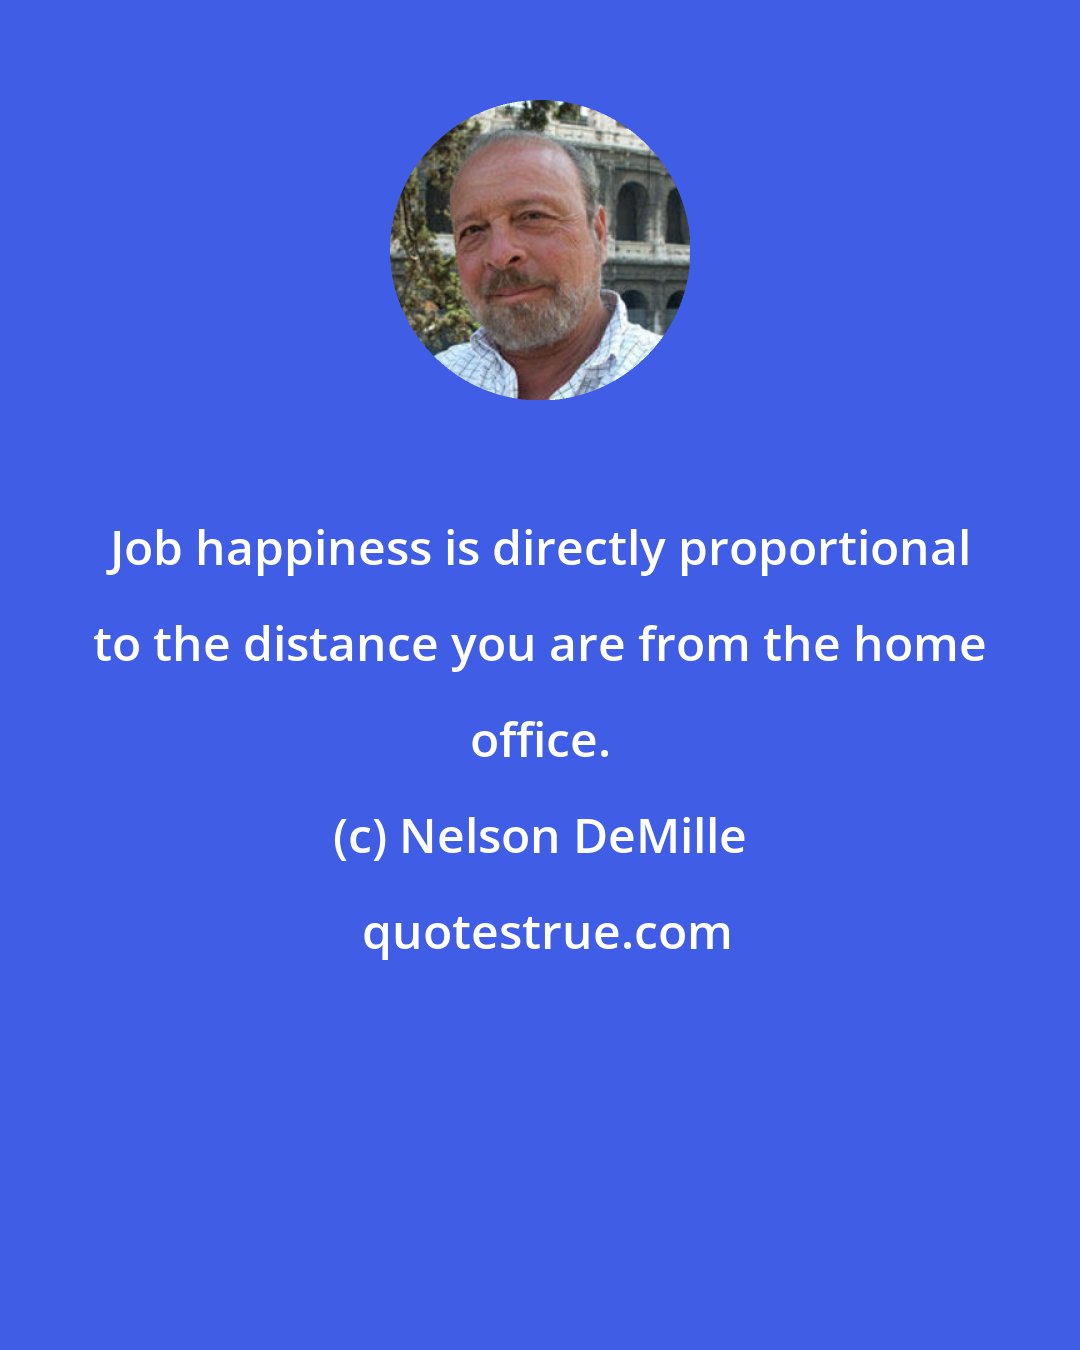 Nelson DeMille: Job happiness is directly proportional to the distance you are from the home office.